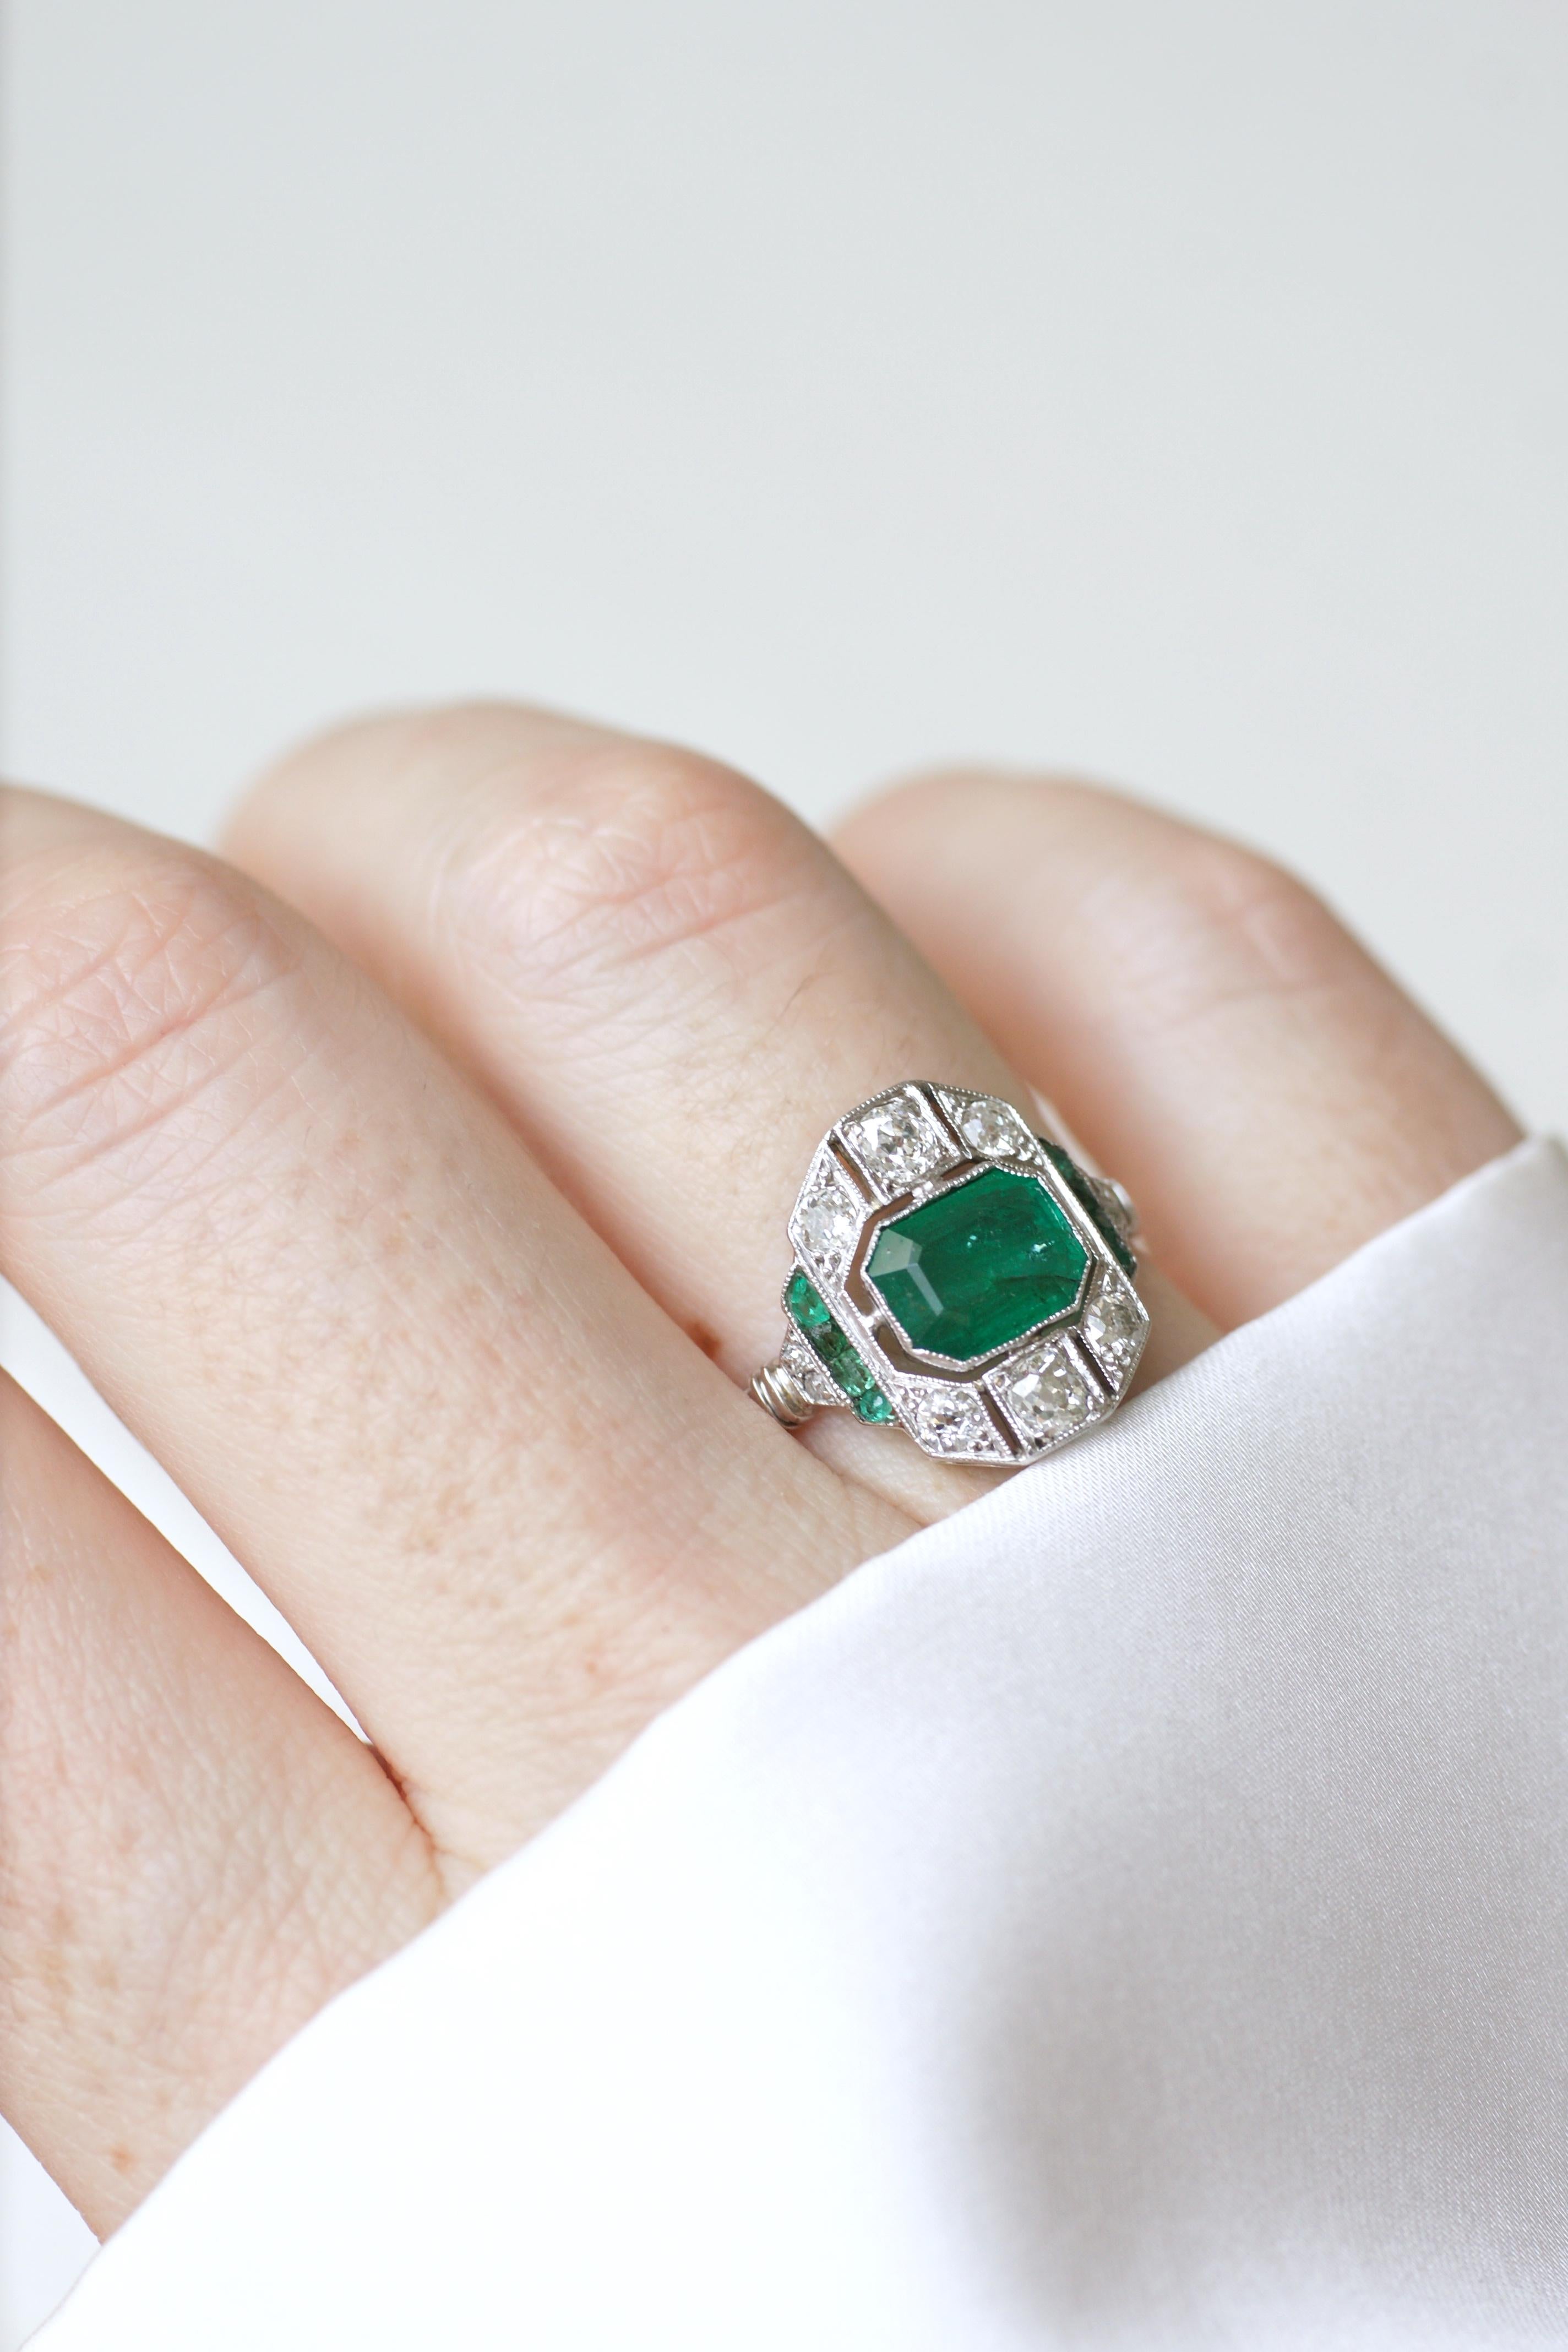 Art Deco ring in 18Kt white gold (hallmark: eagle) set with an emerald cut emerald weighing approximately 1.30 Cts, surrounded with old cut diamond which total weight is apx 0.65 Ct, and square cut emeralds, which total weight is apx